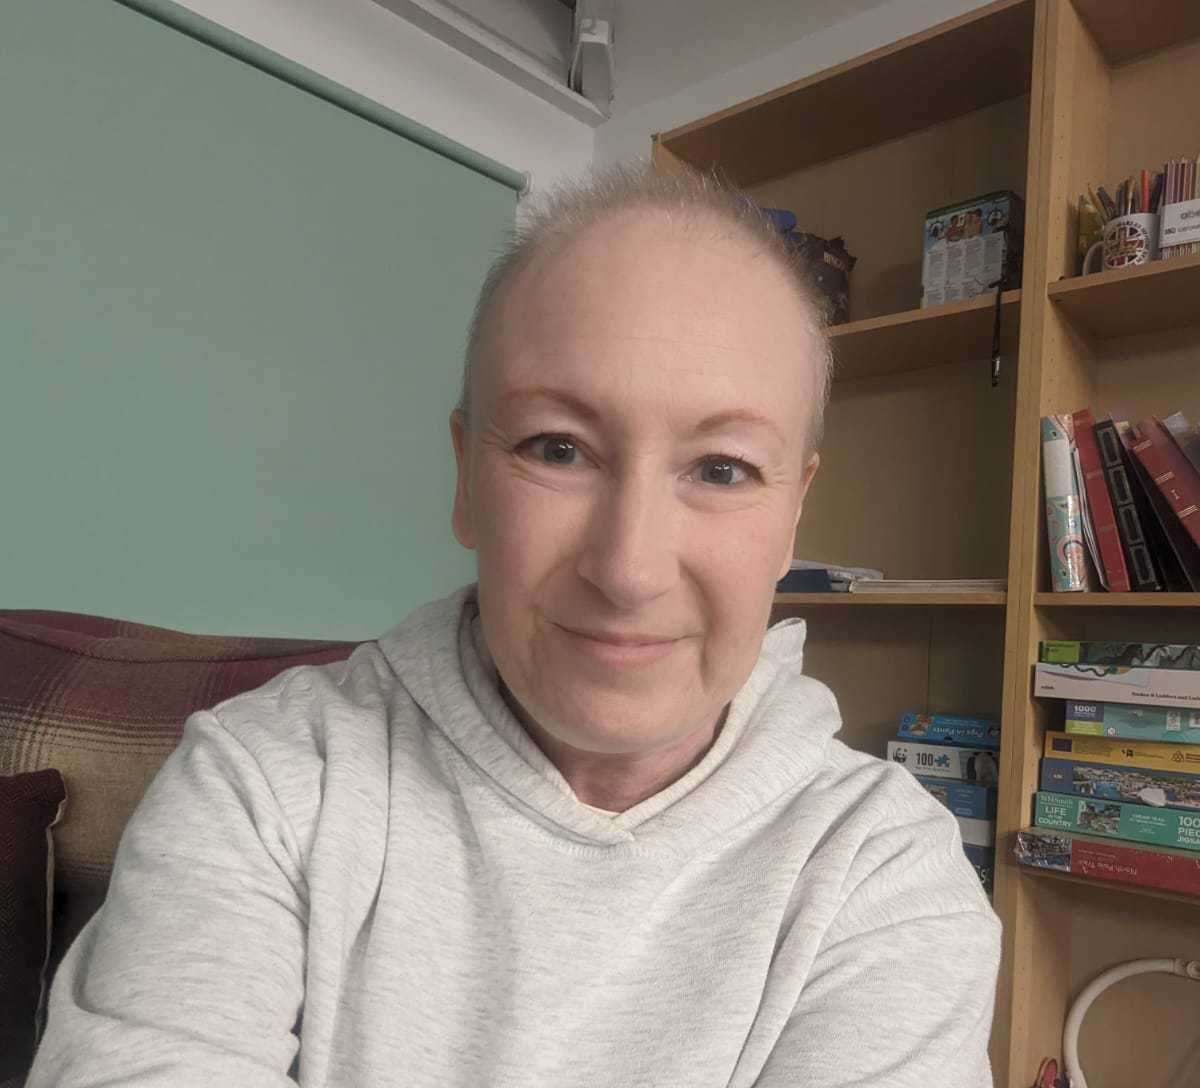 Louise Hutchins, 44, from Folkestone is raising awareness of ovarian cancer after being diagnosed. Picture: Louise Hutchins